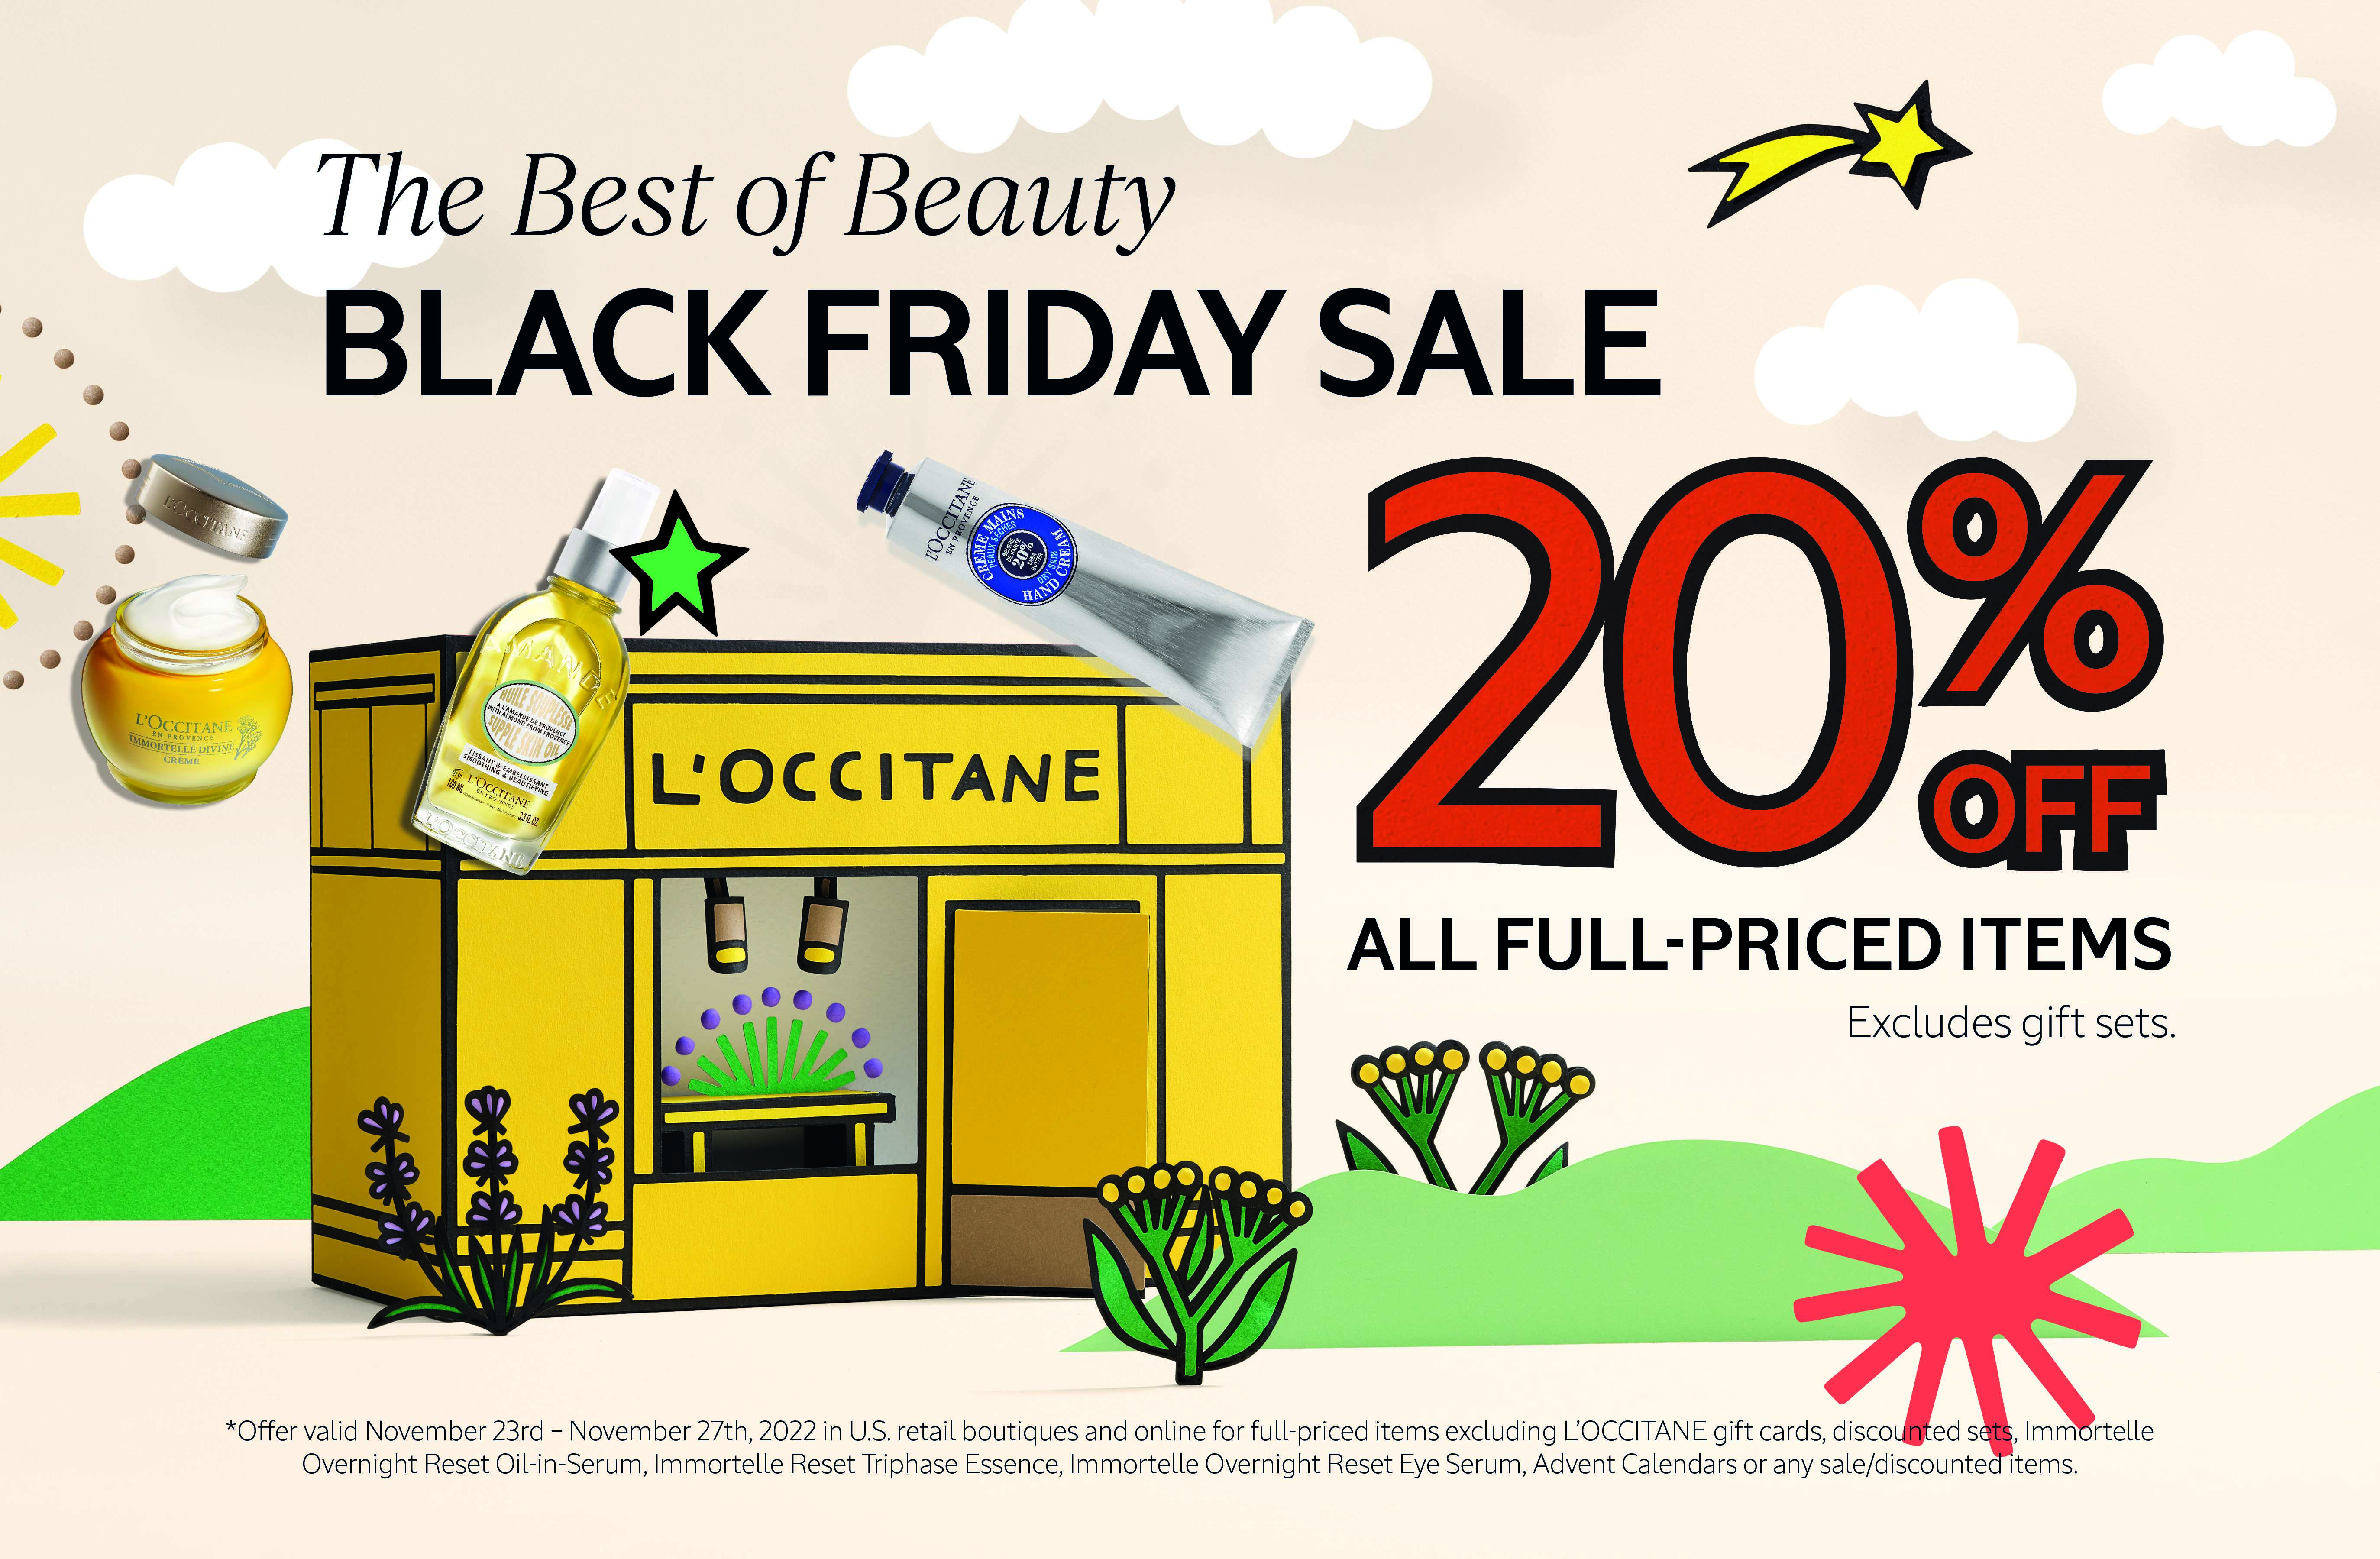 Black Friday Sale from L'Occitane